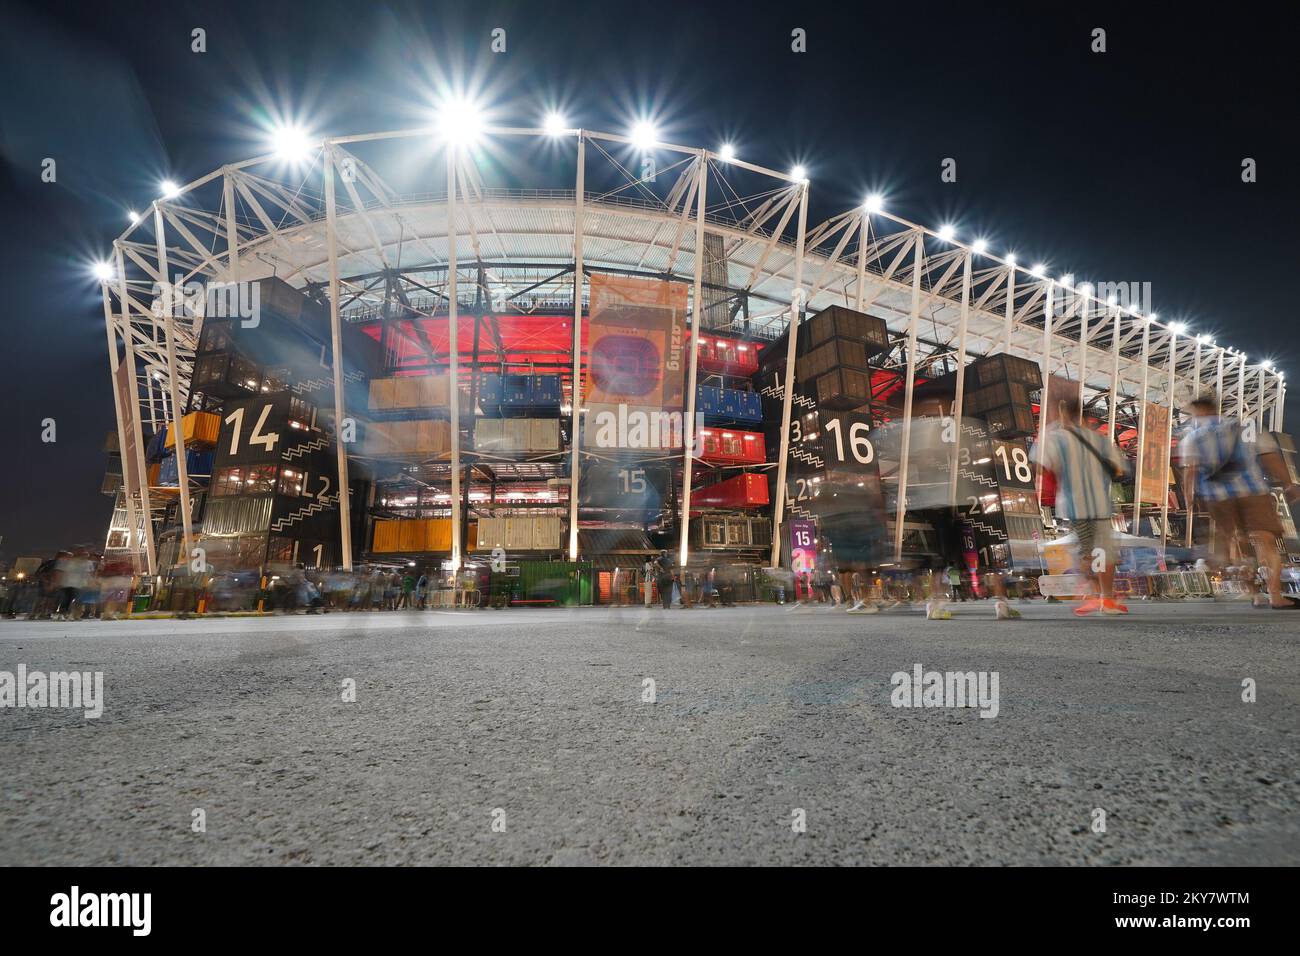 DOHA, QATAR - NOVEMBER 30: A general view of the Stadium 974 before the FIFA World Cup Qatar 2022 group C match between Argentina and Poland at Stadium 974 on November 30, 2022 in Doha, Qatar. (Photo by Florencia Tan Jun/PxImages) Credit: Px Images/Alamy Live News Stock Photo